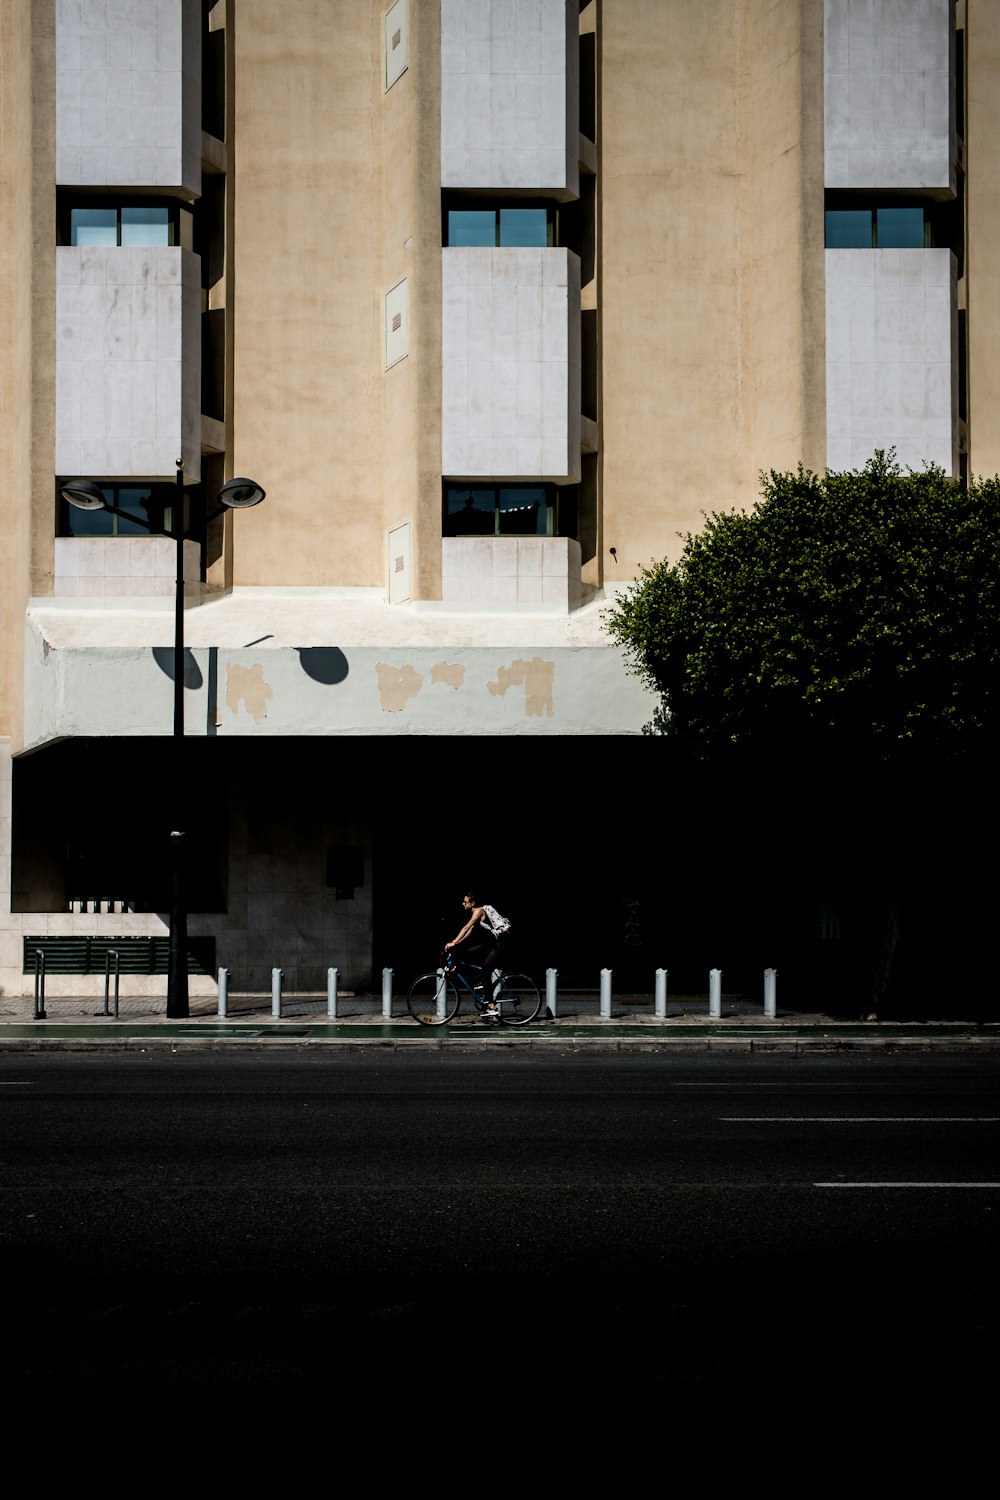 man riding on bicycle beside concrete building